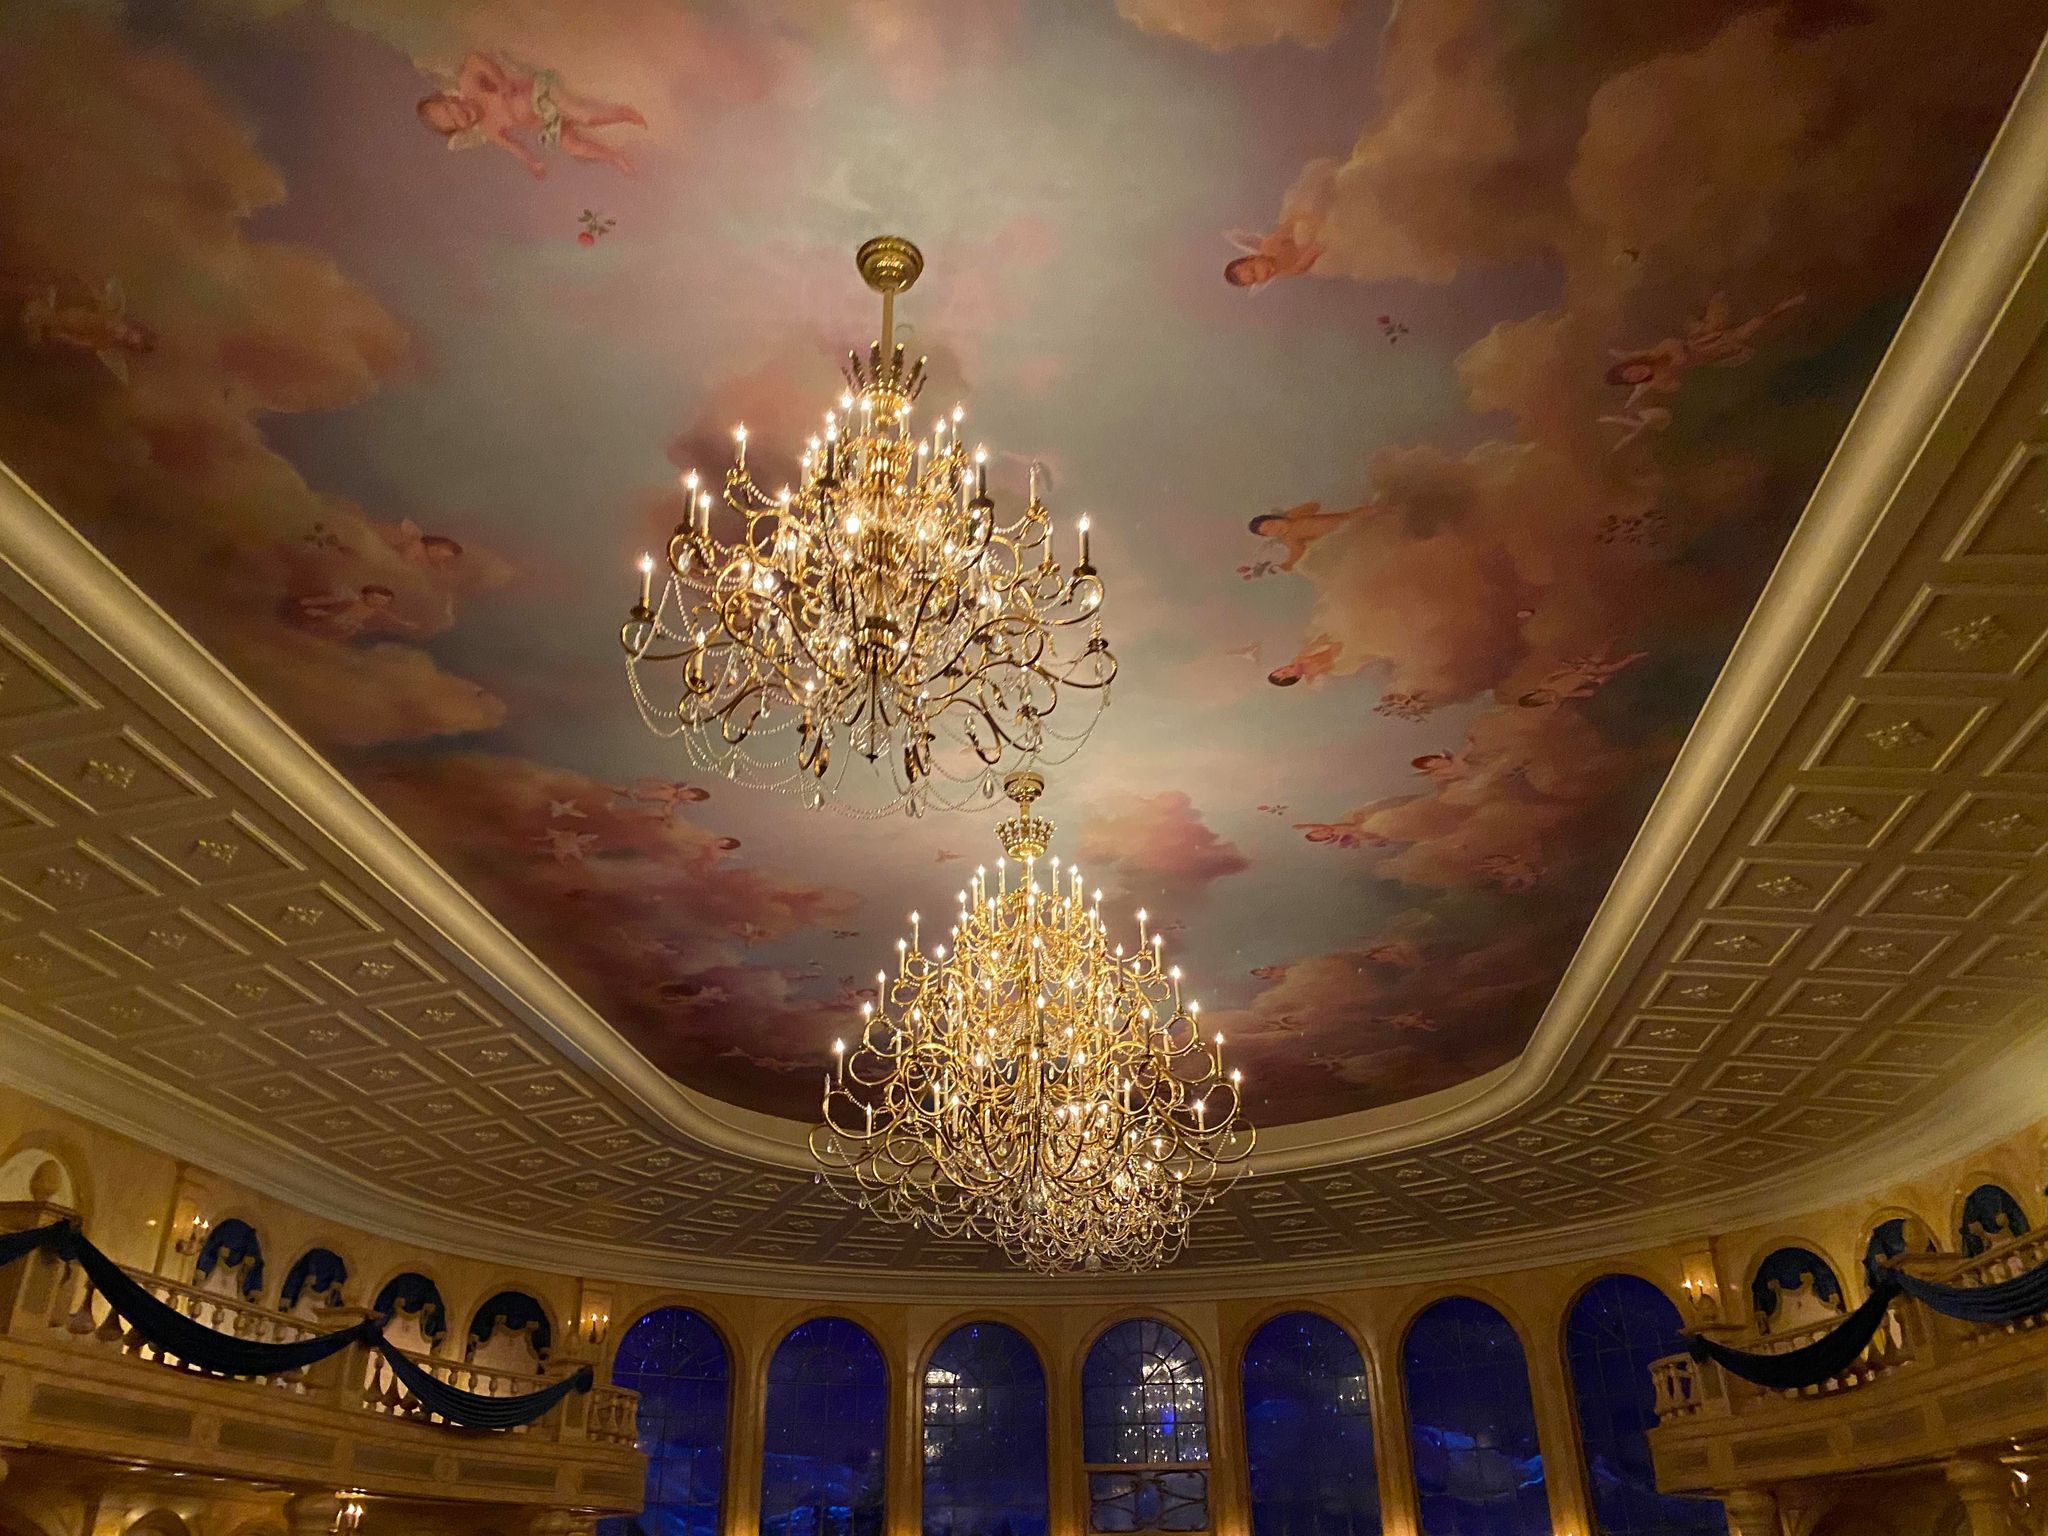 Be Our Guest Dining Review Is The Beauty The Beast Themed Castle Worth The Price